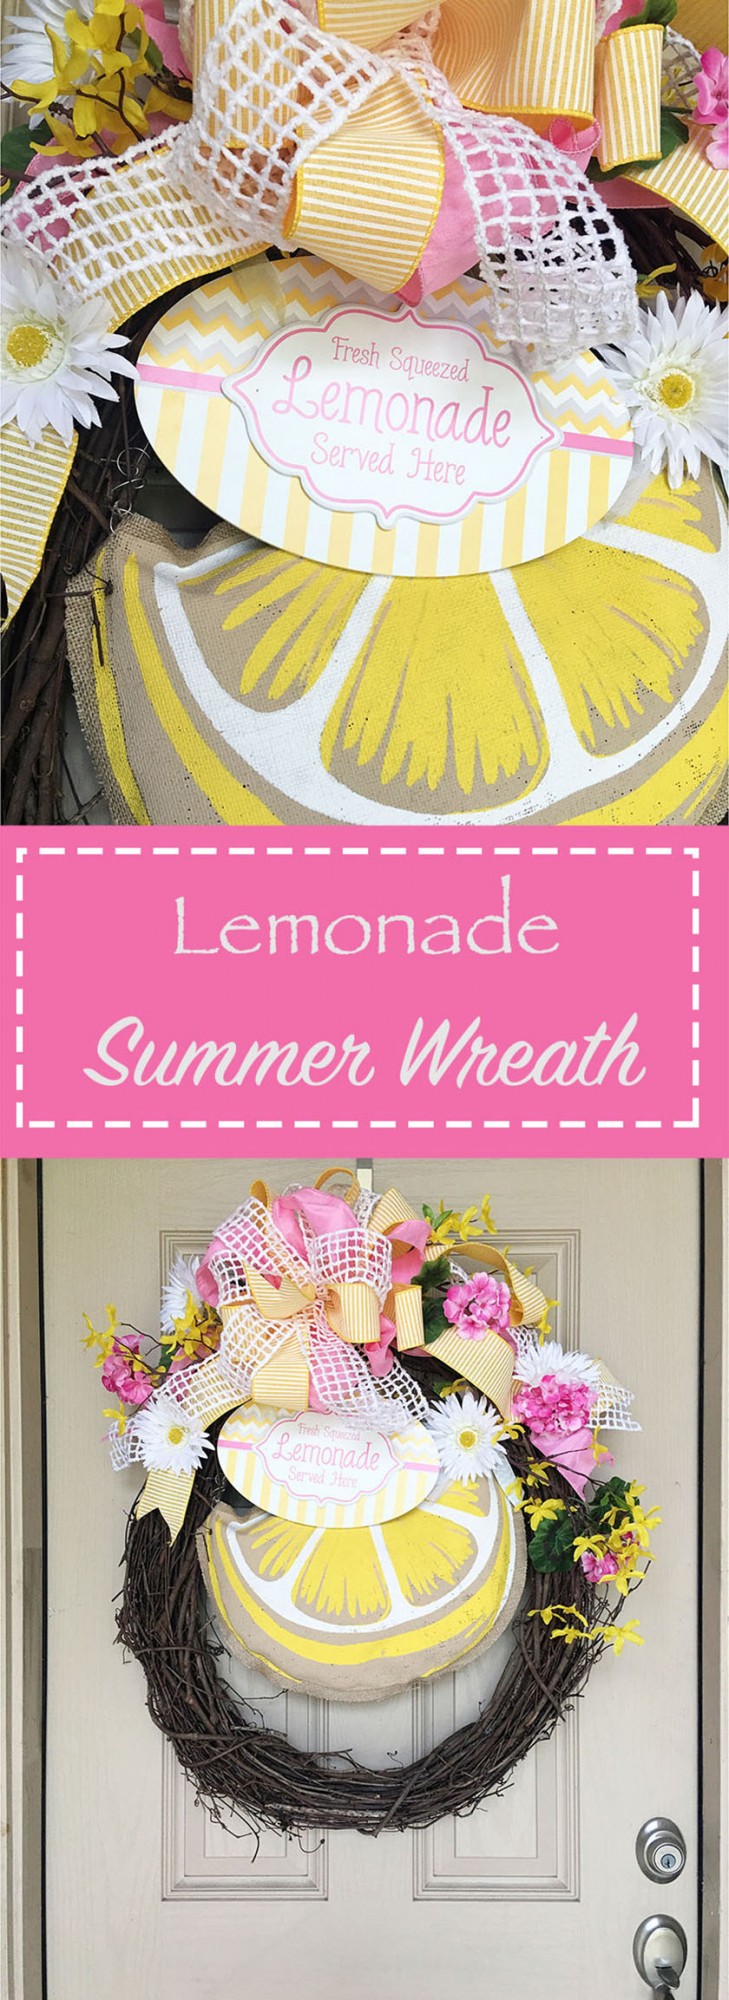 With just a few craft store supplies, you can make this cute summer wreath in an afternoon! Get the tutorial => craftaholicsanonymous.net